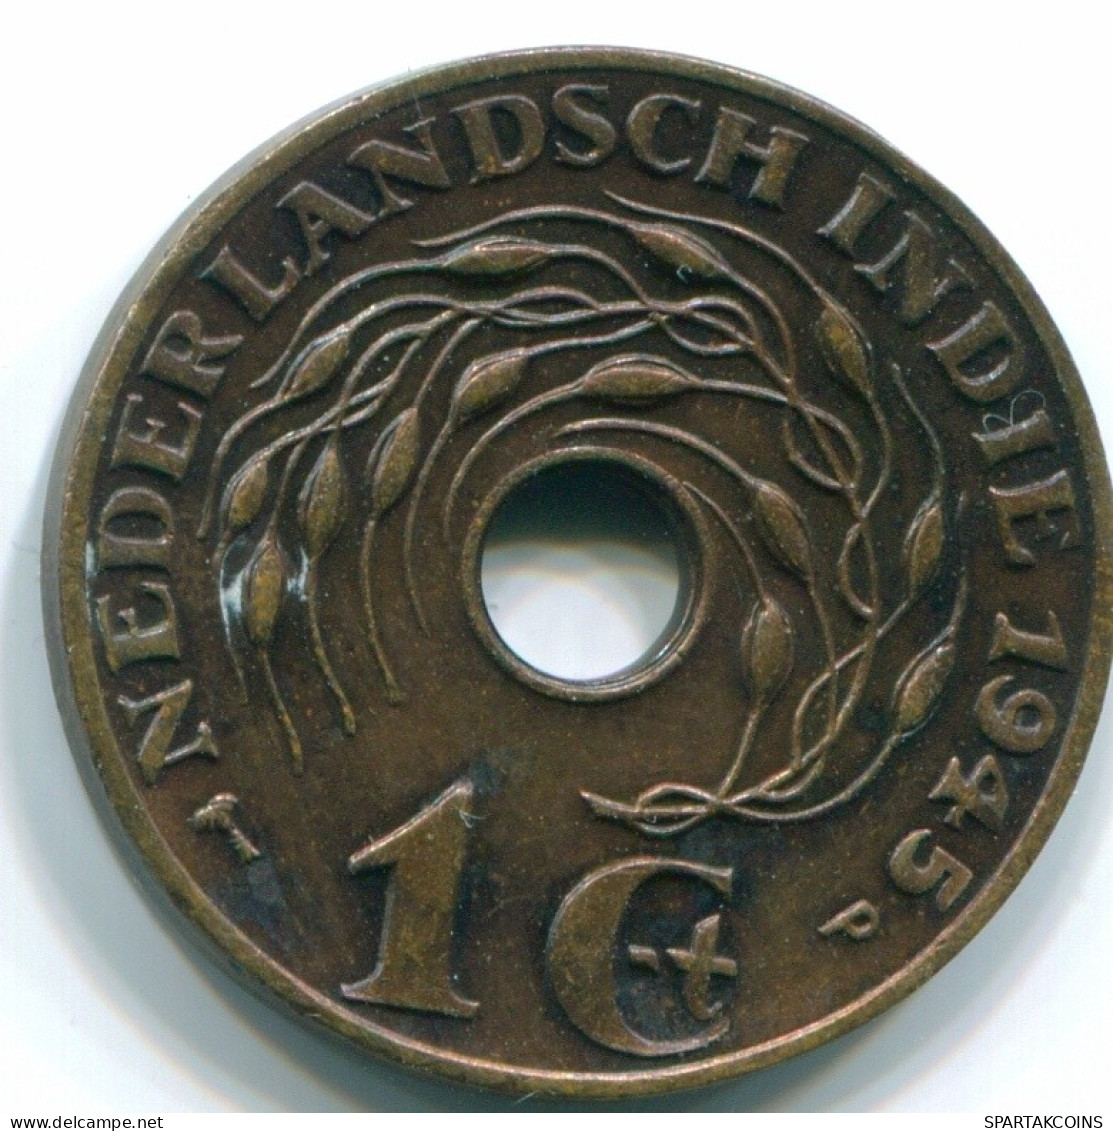 1 CENT 1945 P NETHERLANDS EAST INDIES INDONESIA Bronze Colonial Coin #S10415.U.A - Indes Neerlandesas